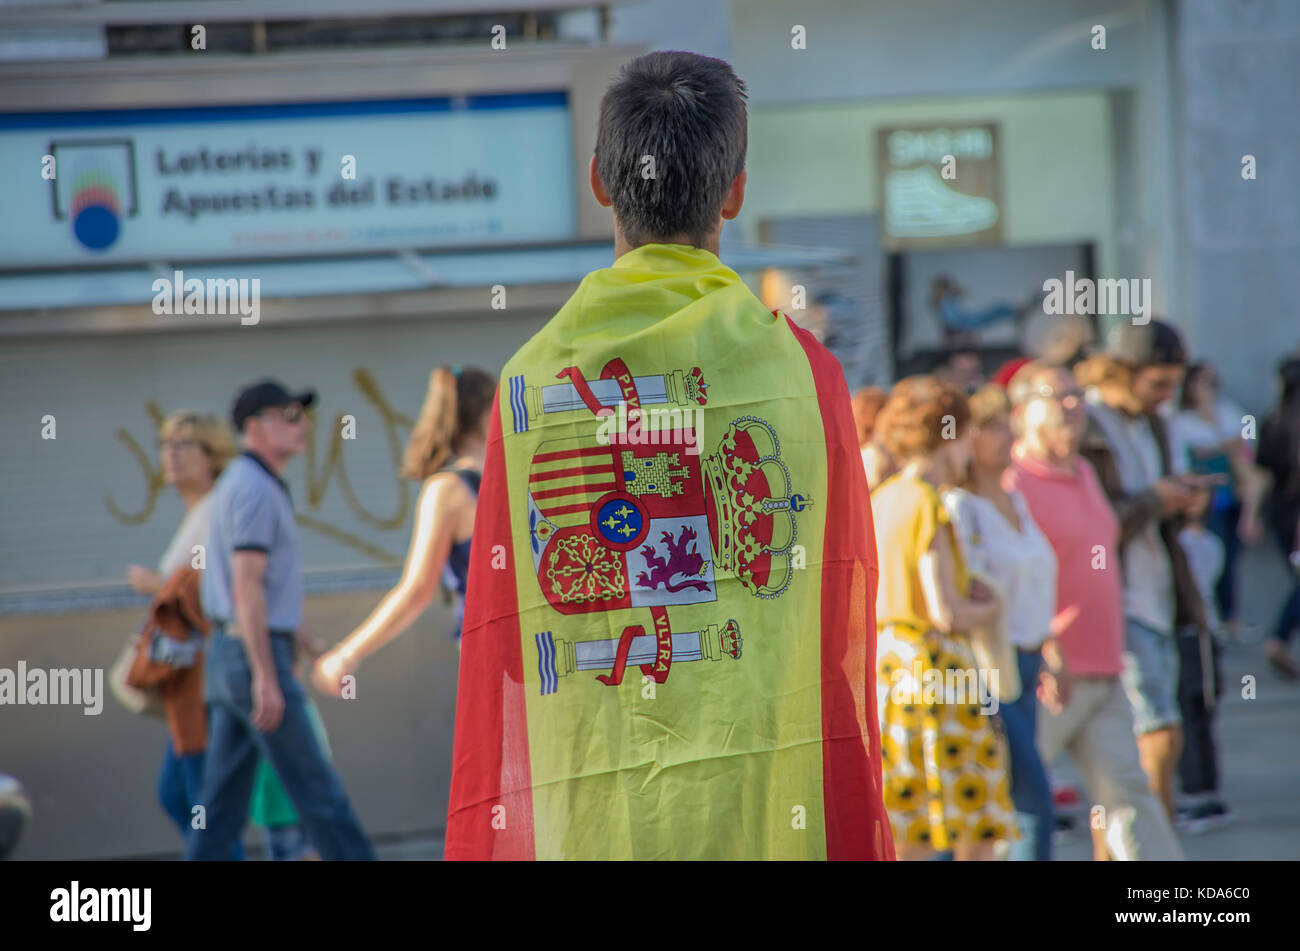 Madrid, Spain. 12th Oct, 2017. Madrid citizens celebrate the National Day of Spain, on the day that Columbus arrived to America. This year, after the struggle between Catalan independendists and the Nationalist, many people celebrated with flags in the streets. Credit: Lora Grigorova/Alamy Live News Stock Photo